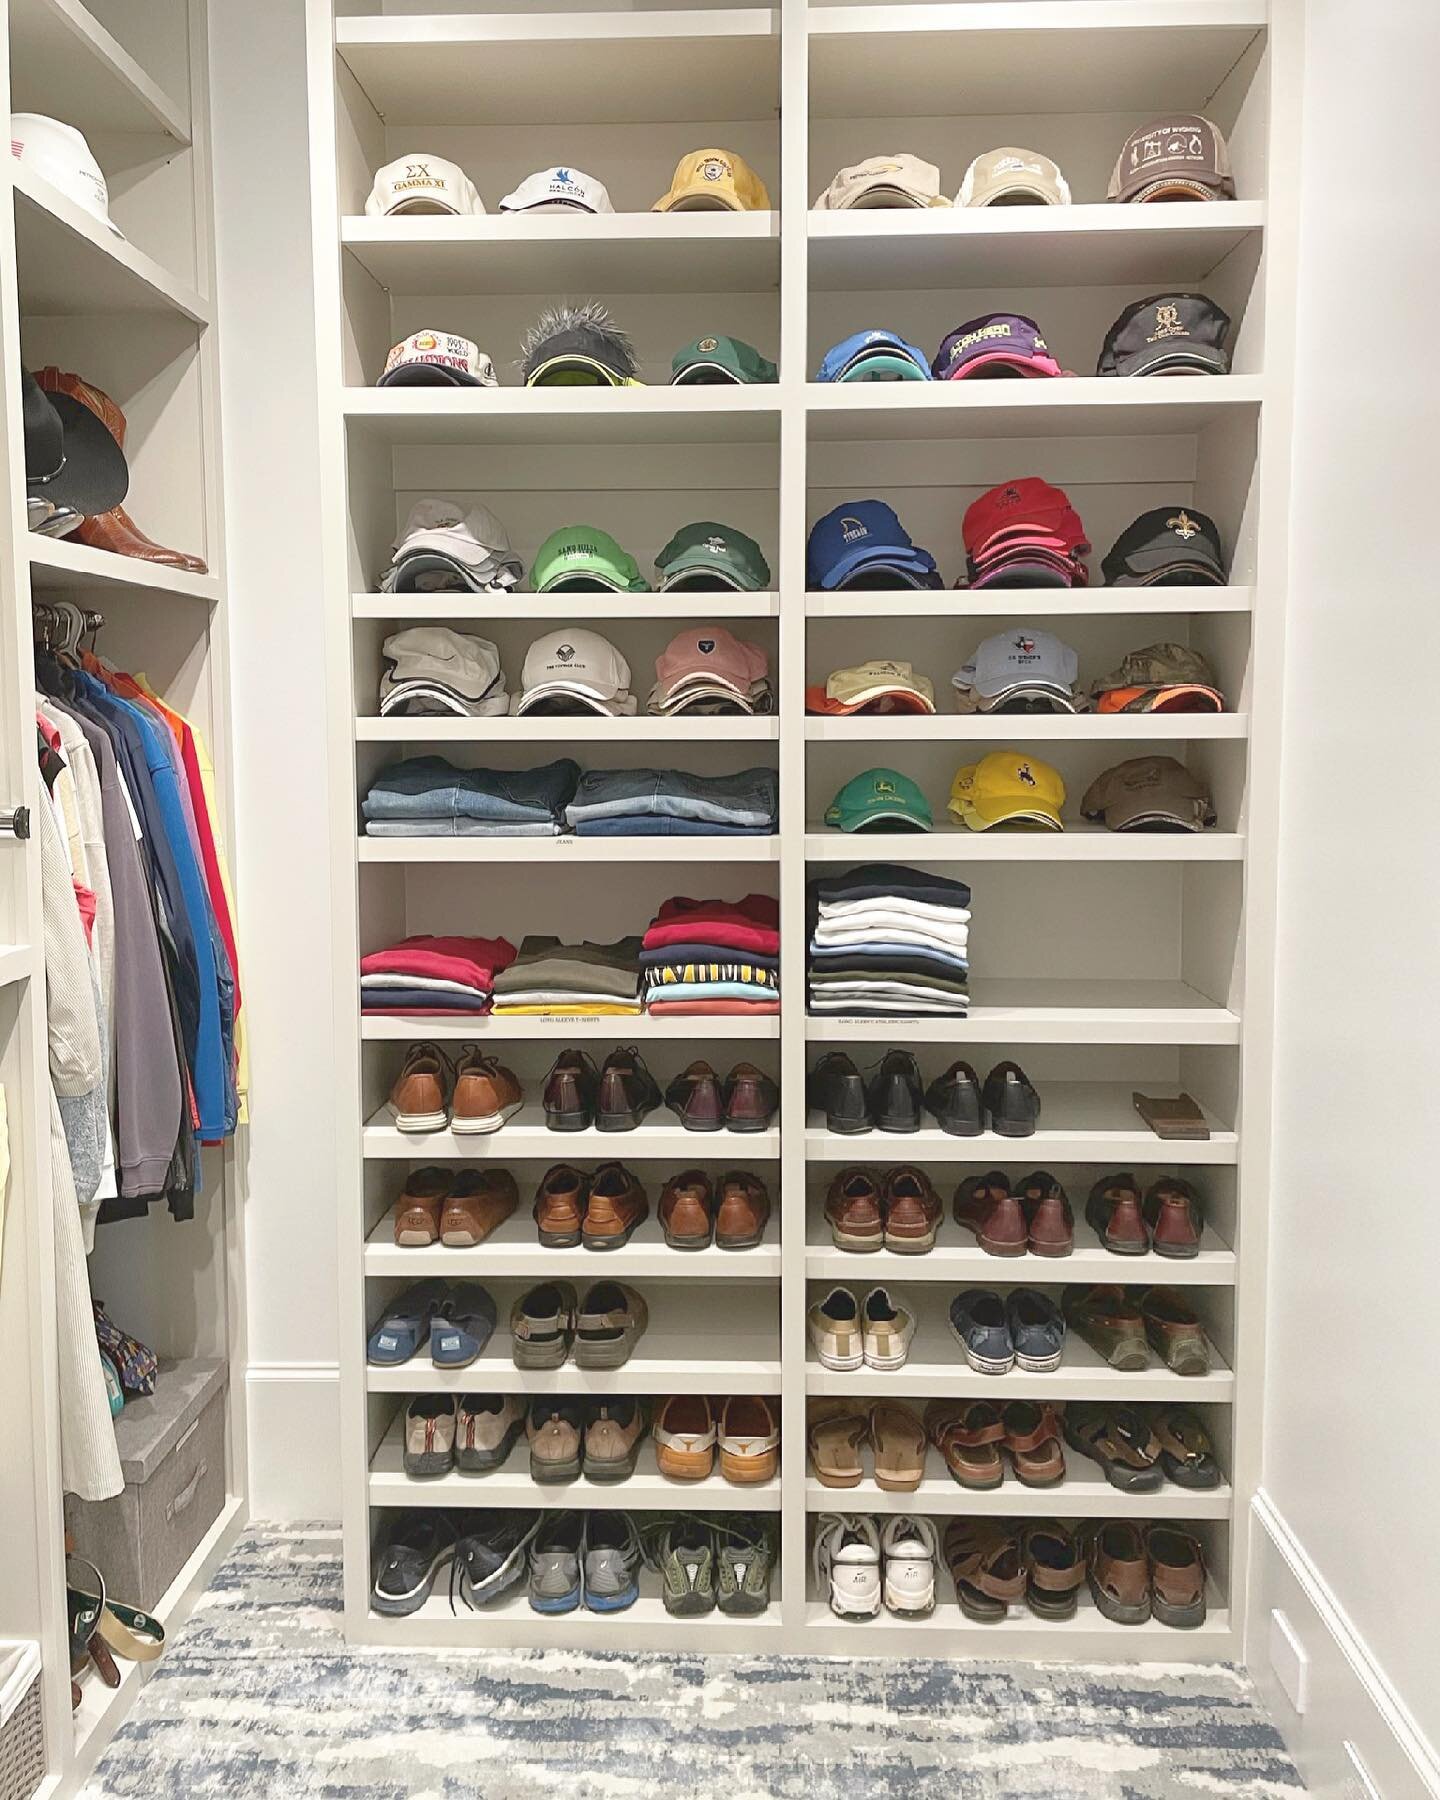 Hats off to this functional and handsome closet! 
.
.
#crosswellorganizing #hats #shoes #closet #closetorganization #shoeorganizer #organization #hatorganization #functional #functionalcloset #hatsoff